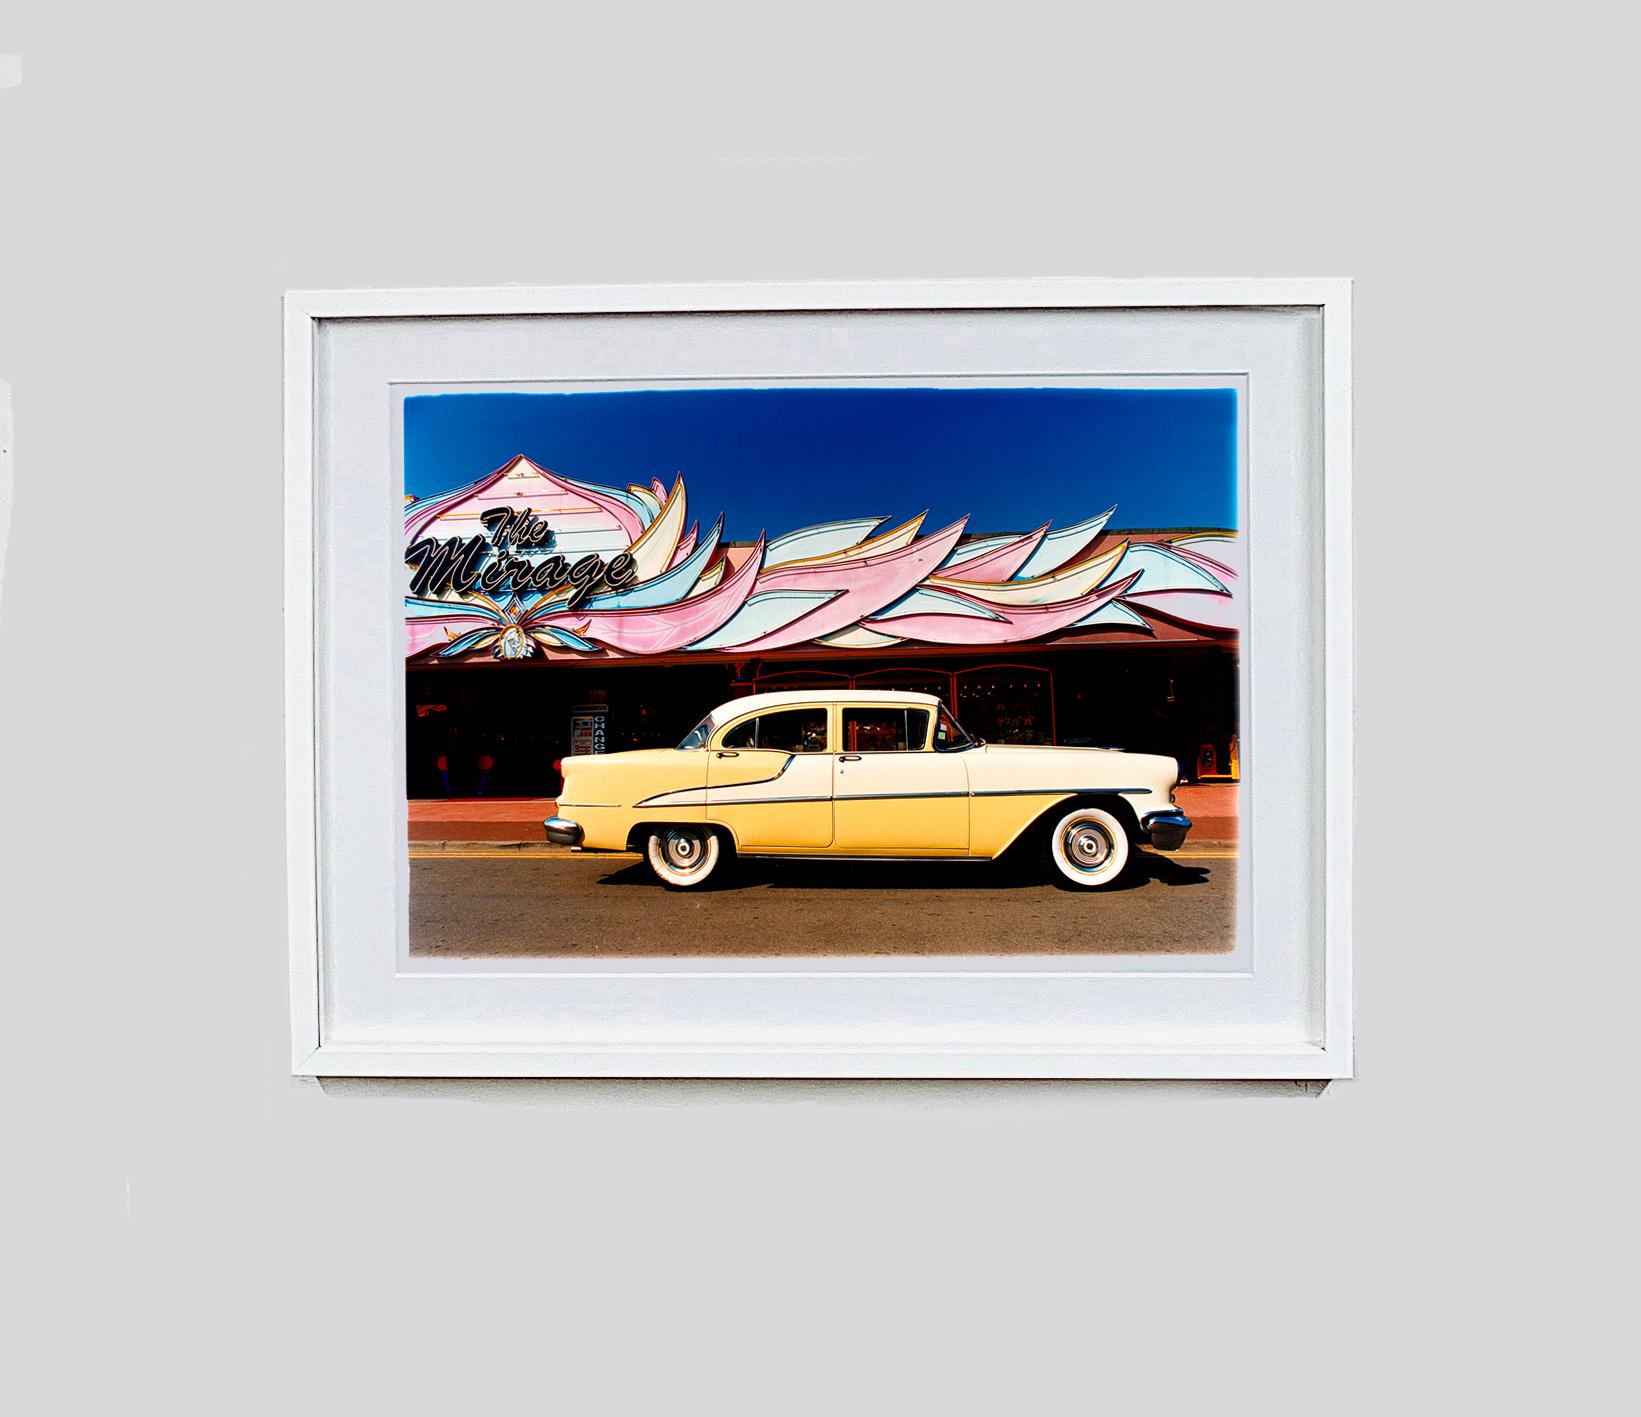 1955 Oldsmobile 88, a yellow classic American car taken outside the Mirage in Hemsby Norfolk. Photograph from Richard Heeps 'Man's Ruin' series.

This artwork is a limited edition of 25, gloss photographic print, dry-mounted to aluminium, presented